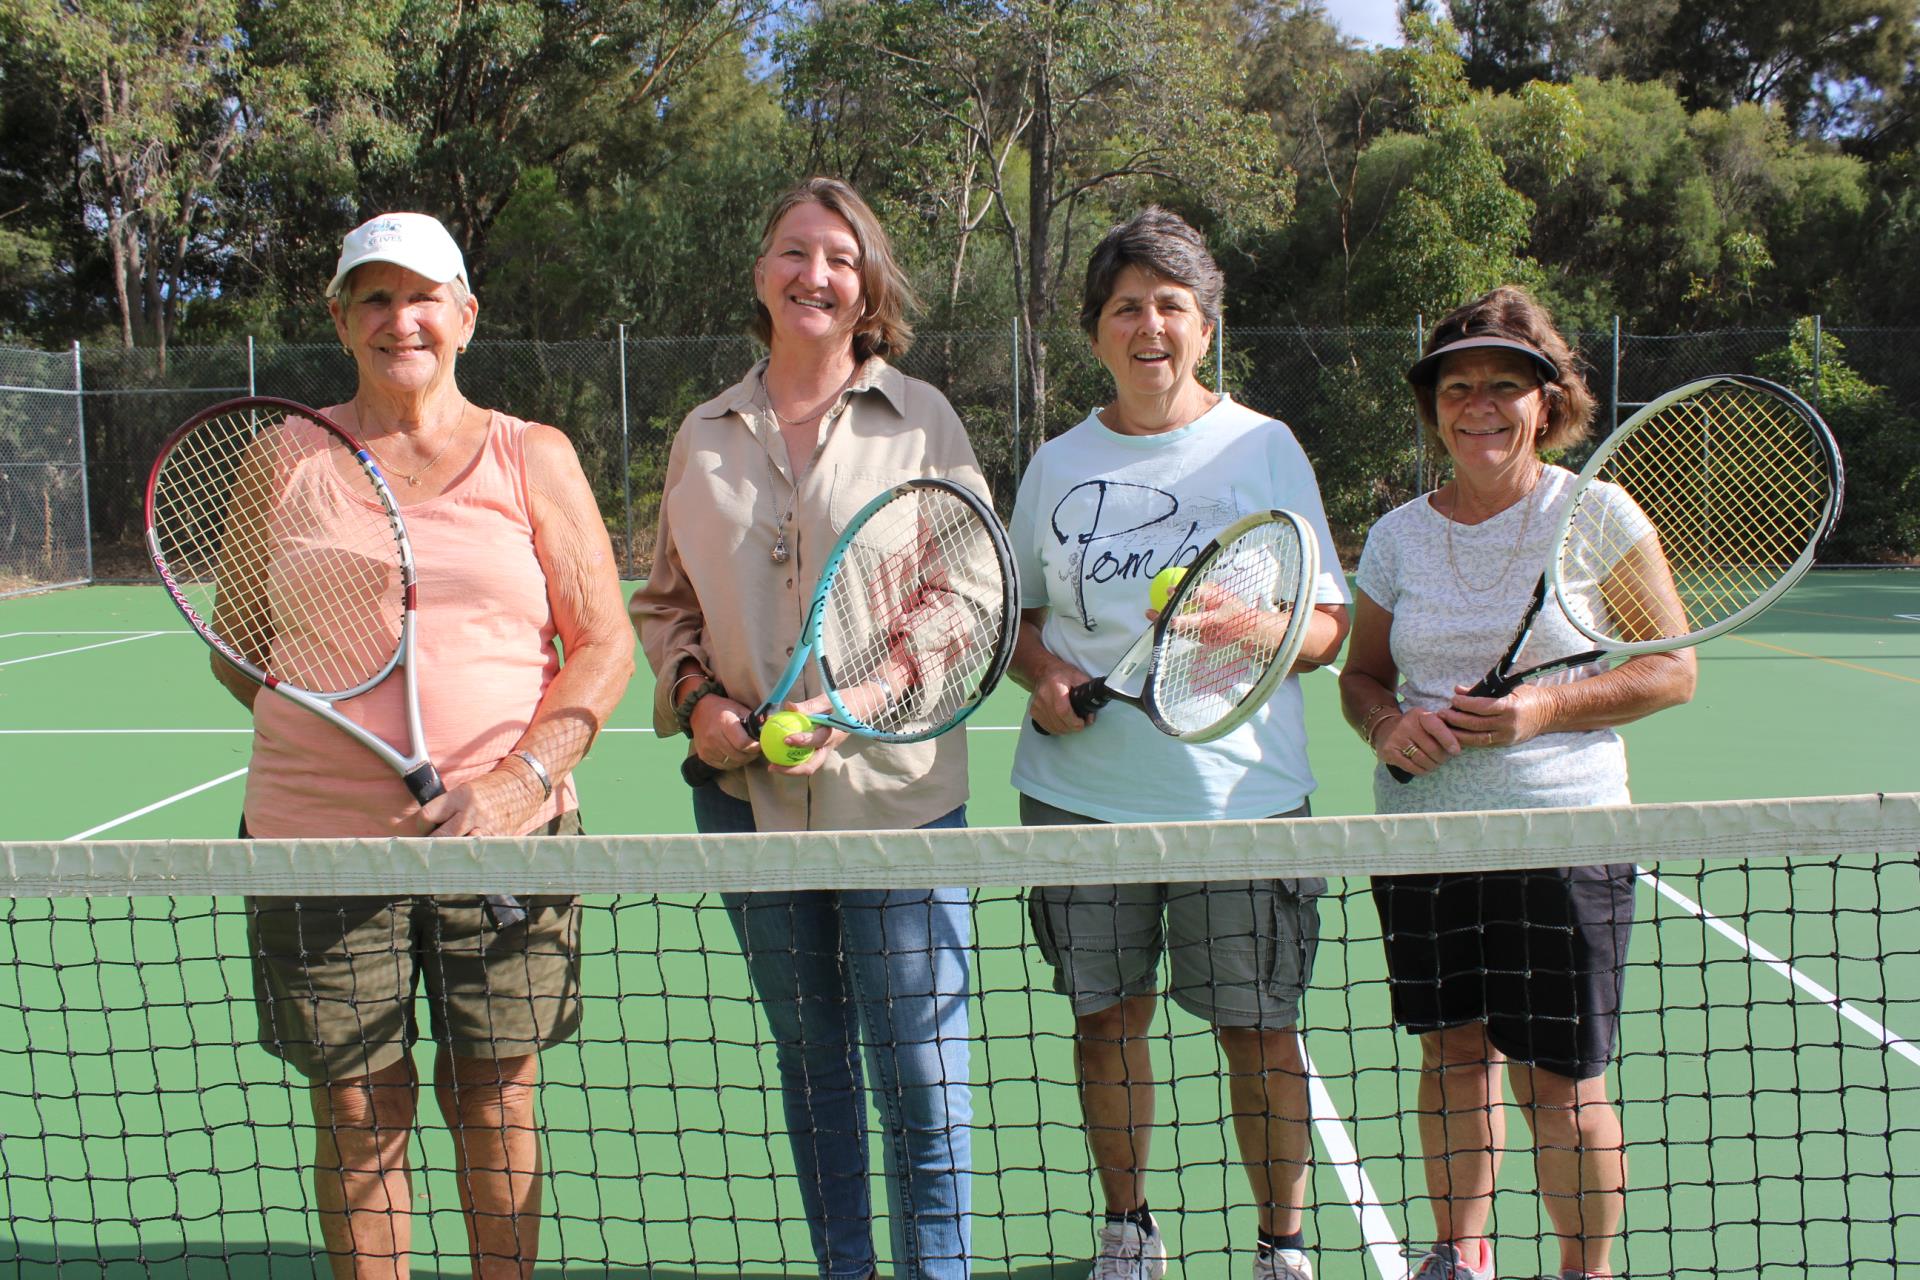 Shire of Serpentine Jarrahdale President Cr Michelle Rich (second left) with Byford Tennis Club members Fran Paterson, Tricia Masnyk and Jenny Hewitt.